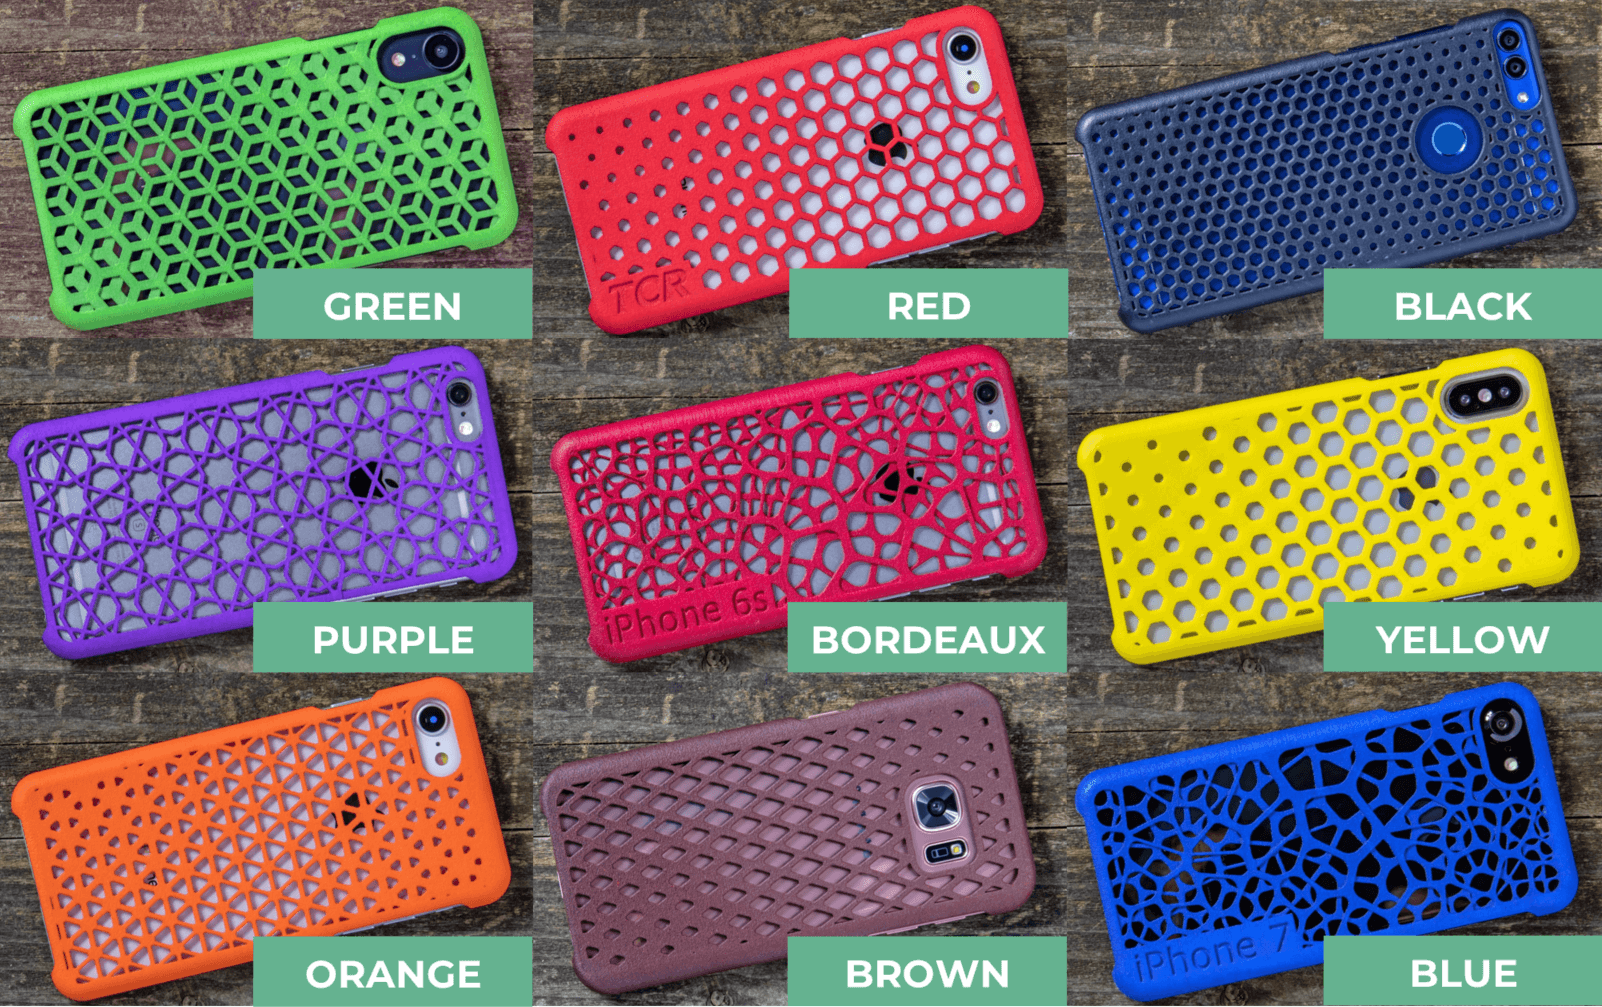 Colour overview 3D printed smartphone cases